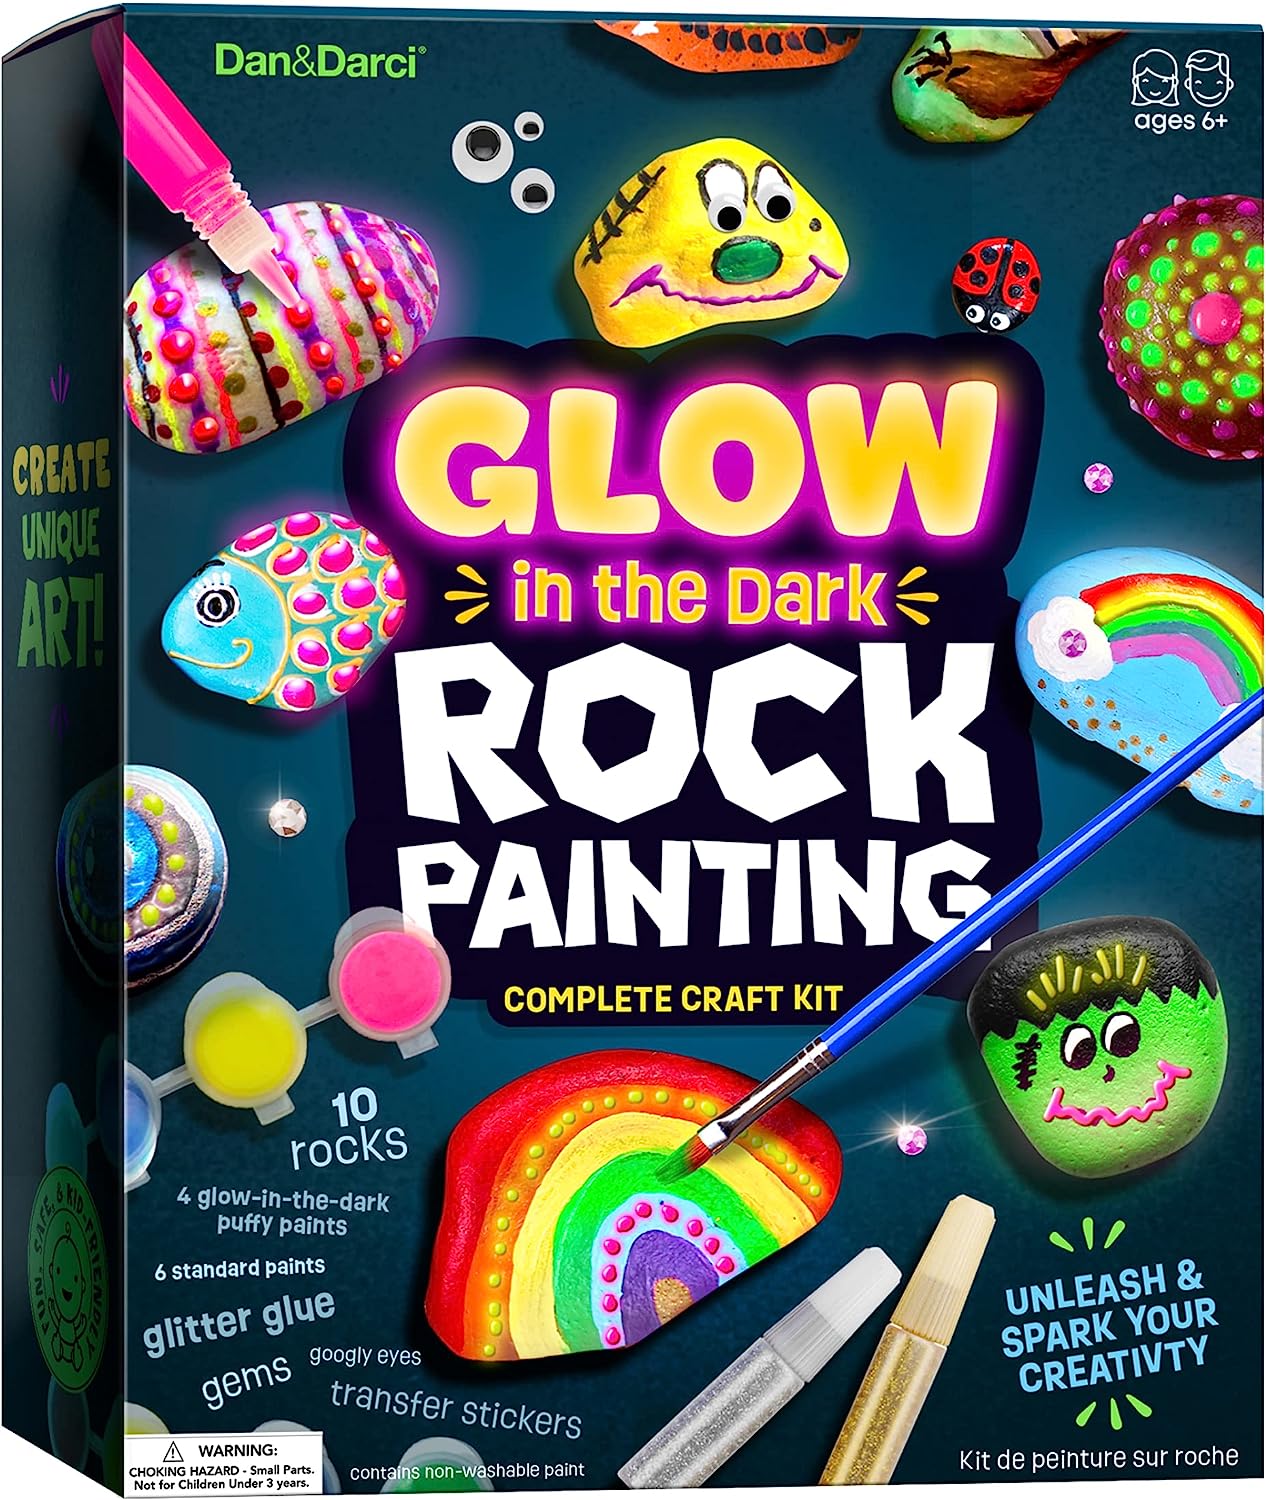 Kipipol Rock Painting Kit for Kids - DIY Arts and Crafts Set for Girls, Boys Ages 3, 4, 5 and Up - Fun Outdoor Activities w/10 Stones, 12 Acrylic